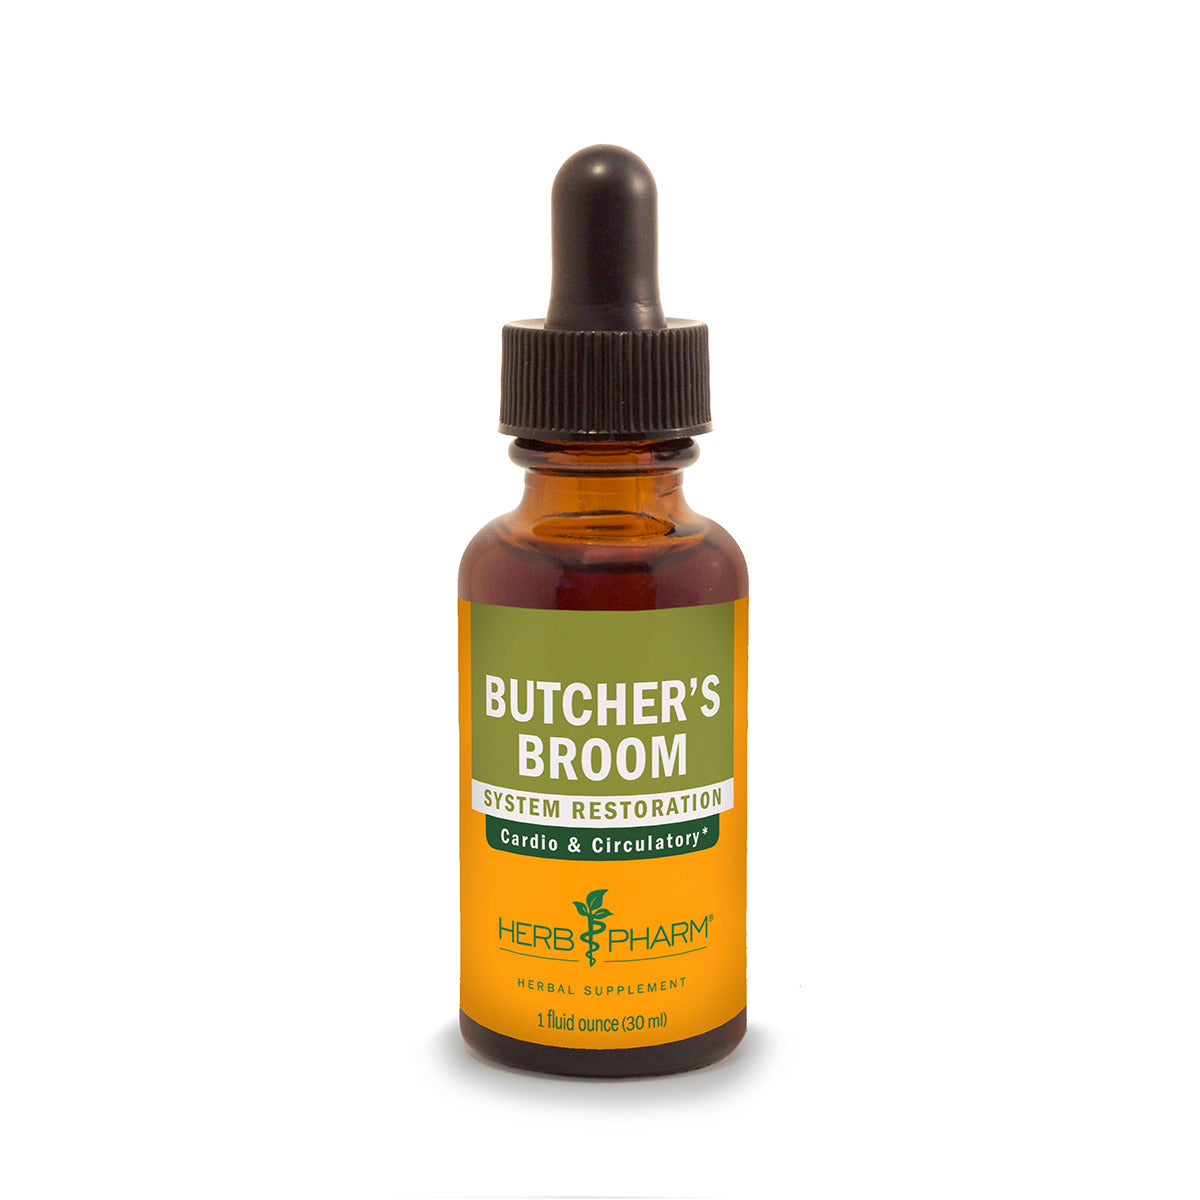 Primary image of Butcher's Broom Extract